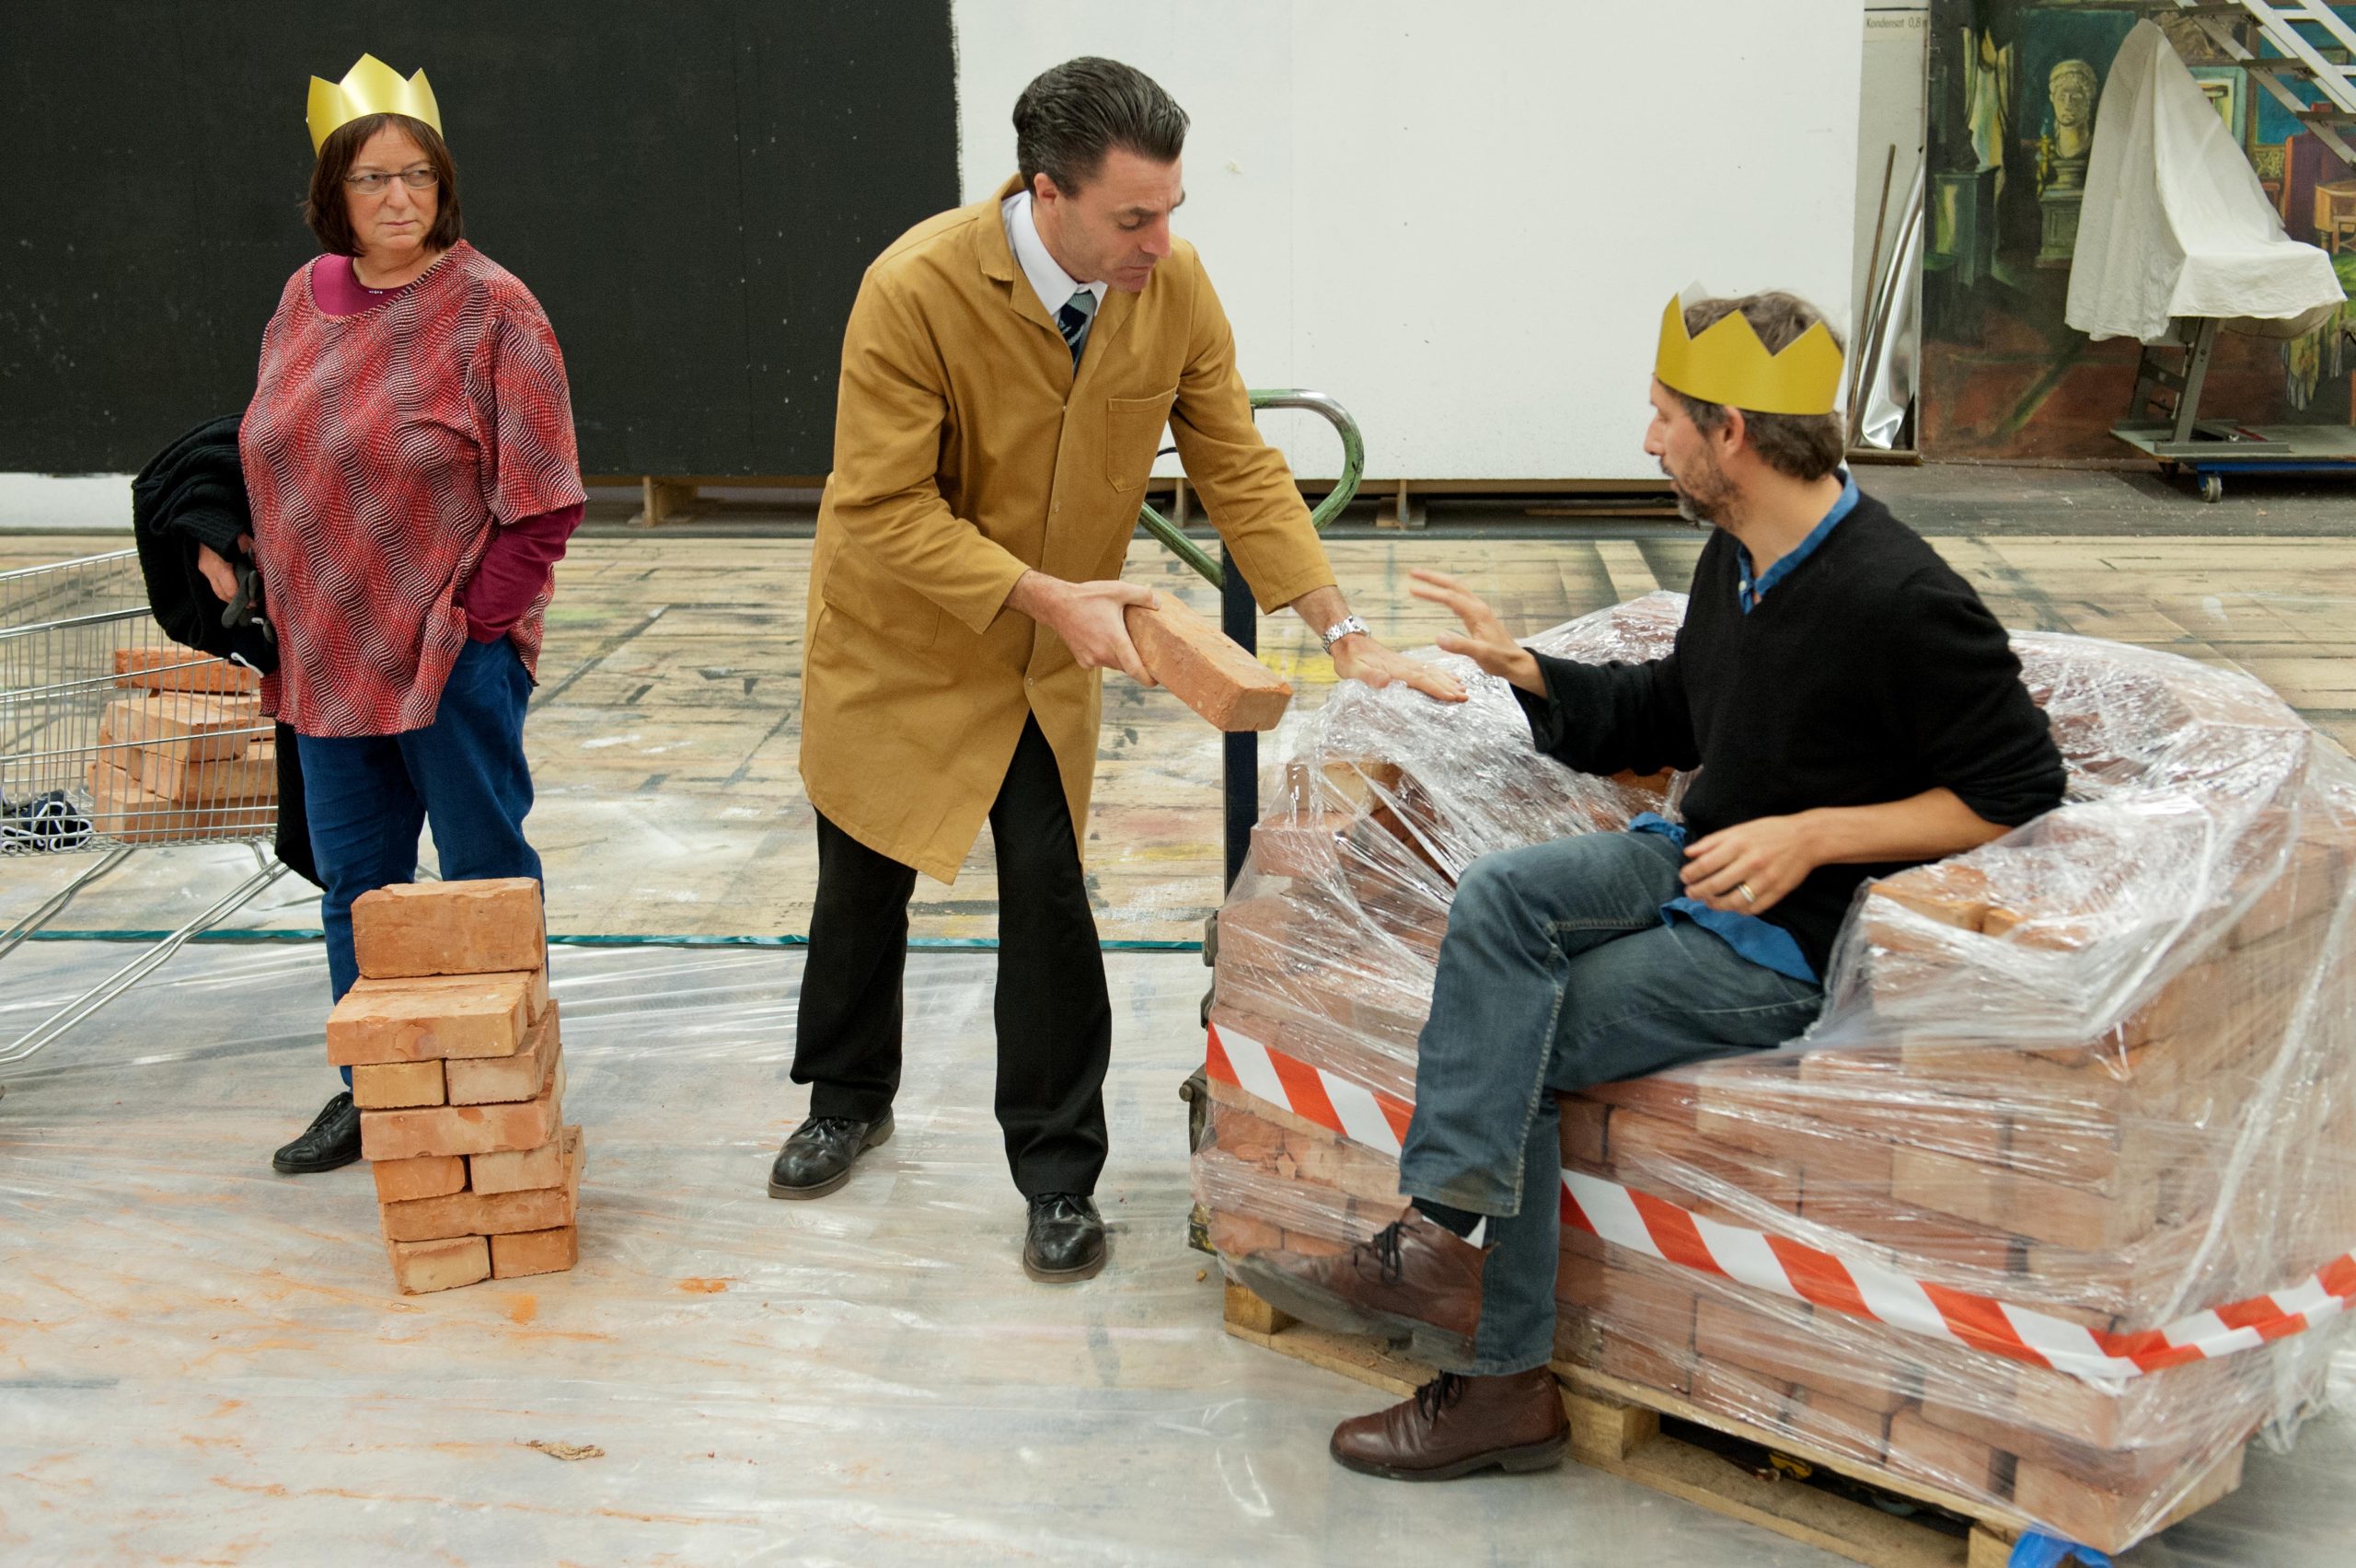 A warehouse man takes bricks from one thrown to add to a modest pile of bricks belonging to another member of the public wearing a crown.